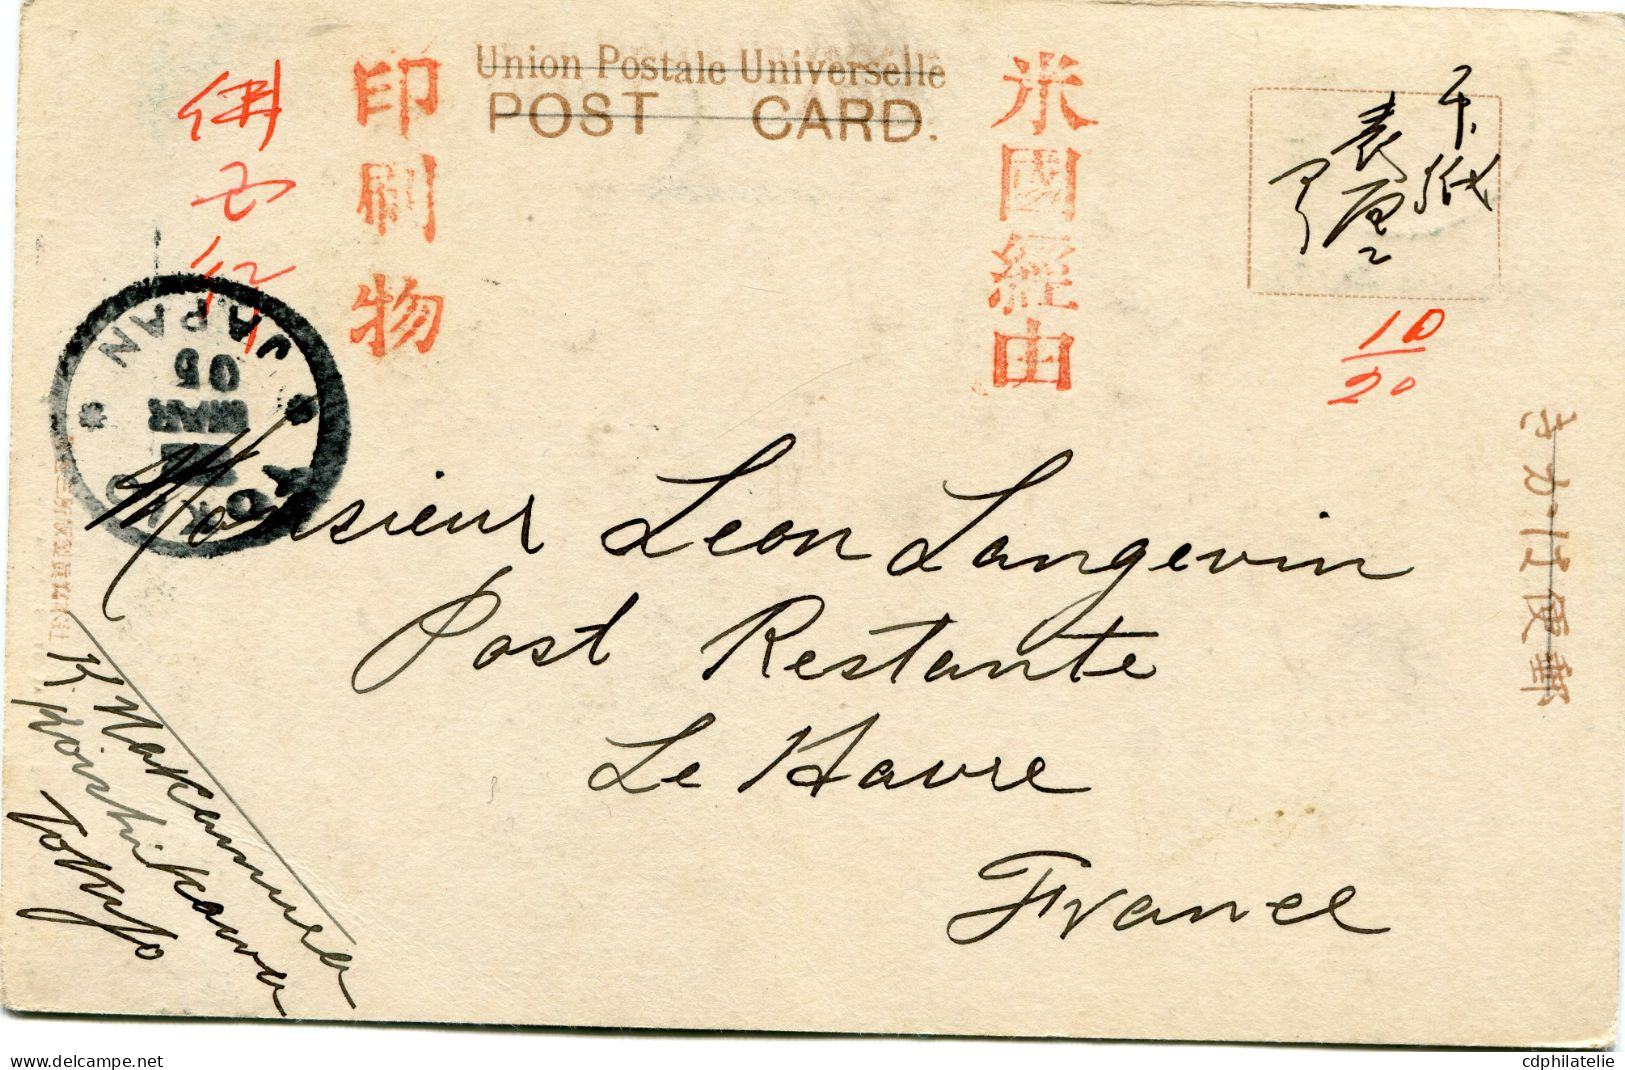 JAPON CARTE POSTALE AYANT VOYAGEE -GENERAL NOGI AND THE GENERAL STOSSEL'S FAVORITE HORSE - Storia Postale